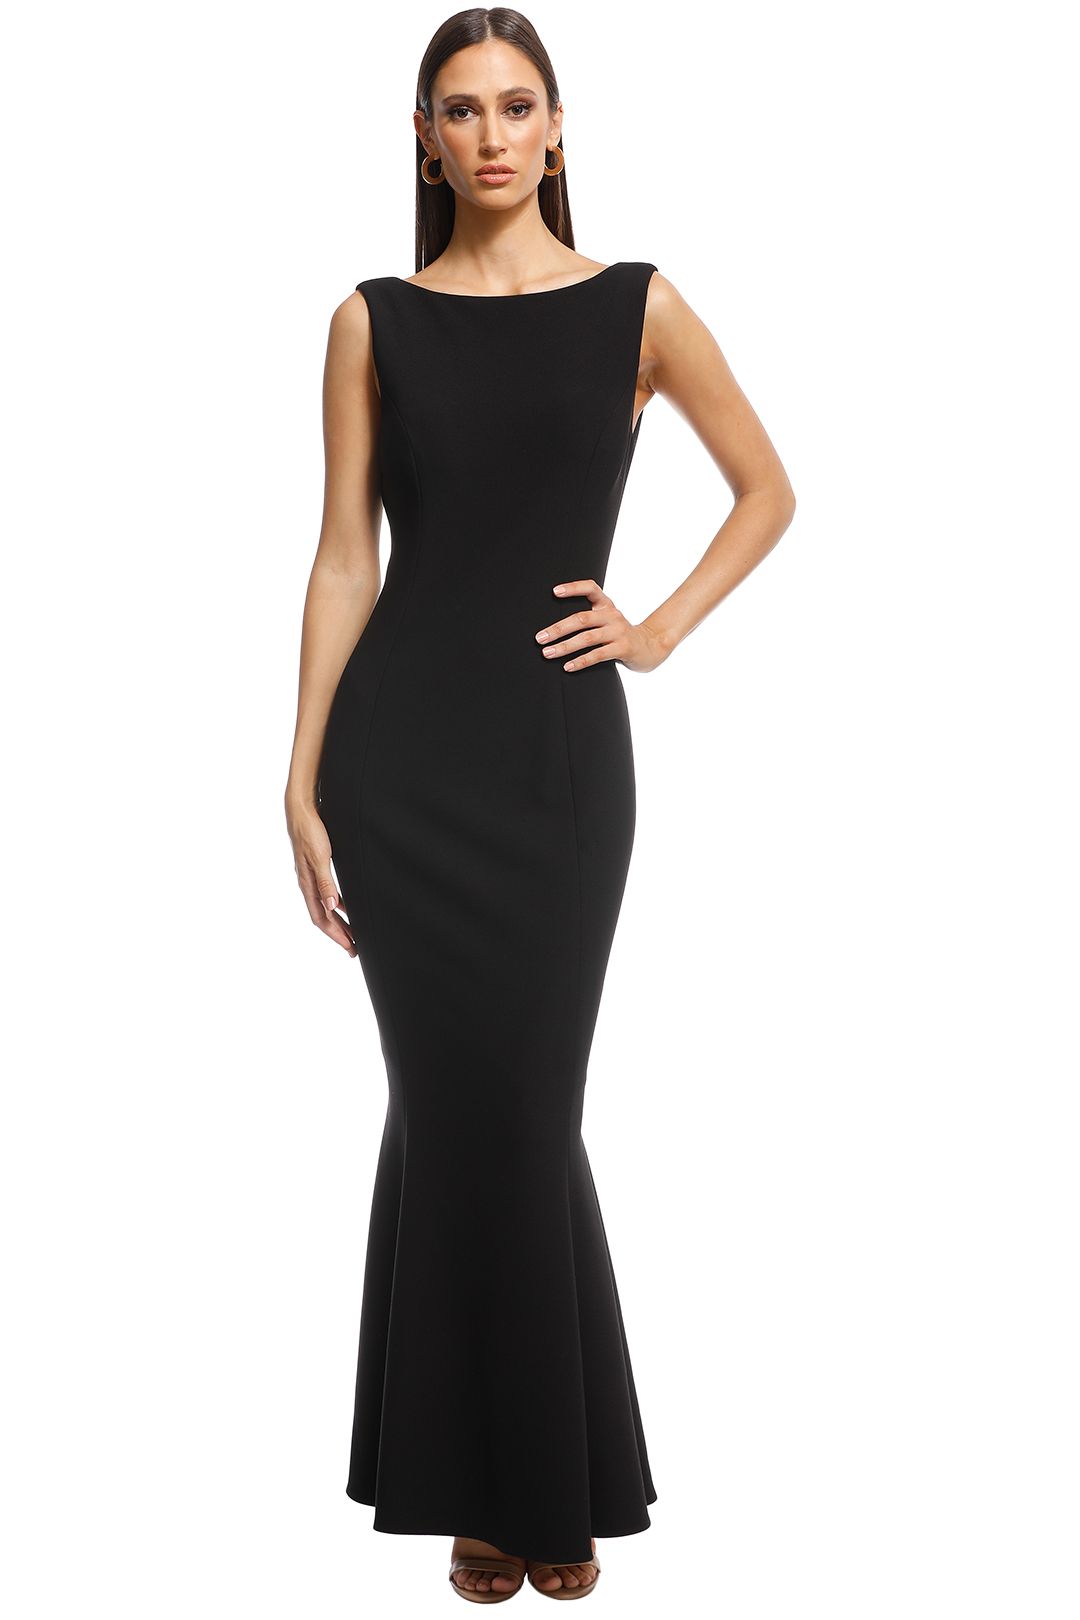 Grace and Hart - Eternal Obsession Gown - Black - Front